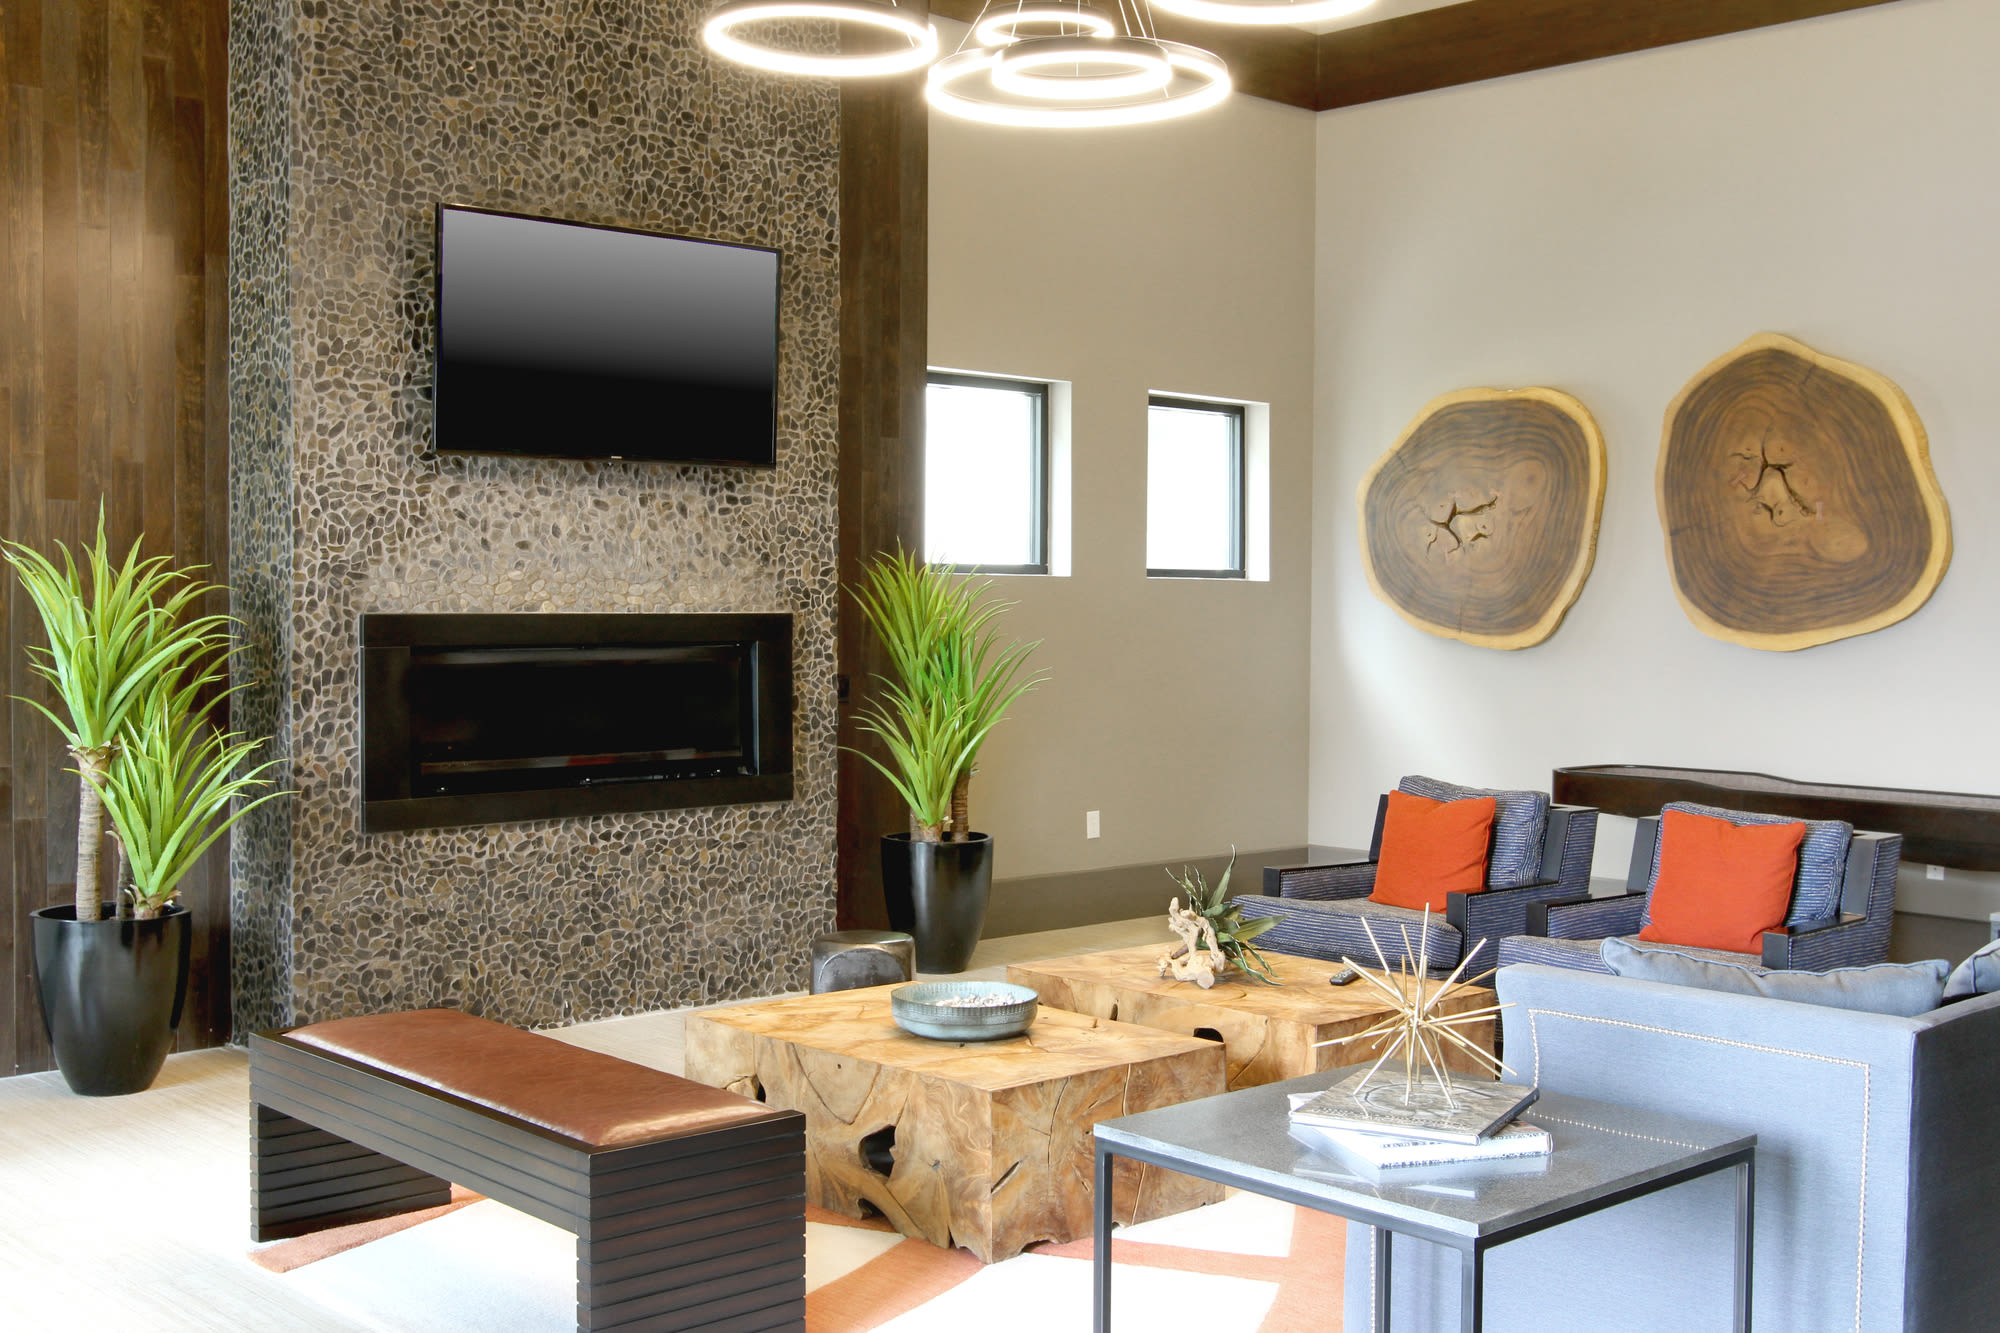 Modern clubhouse with fireplace and flatscreen tv in sitting area at Henley at The Rim in San Antonio, Texas